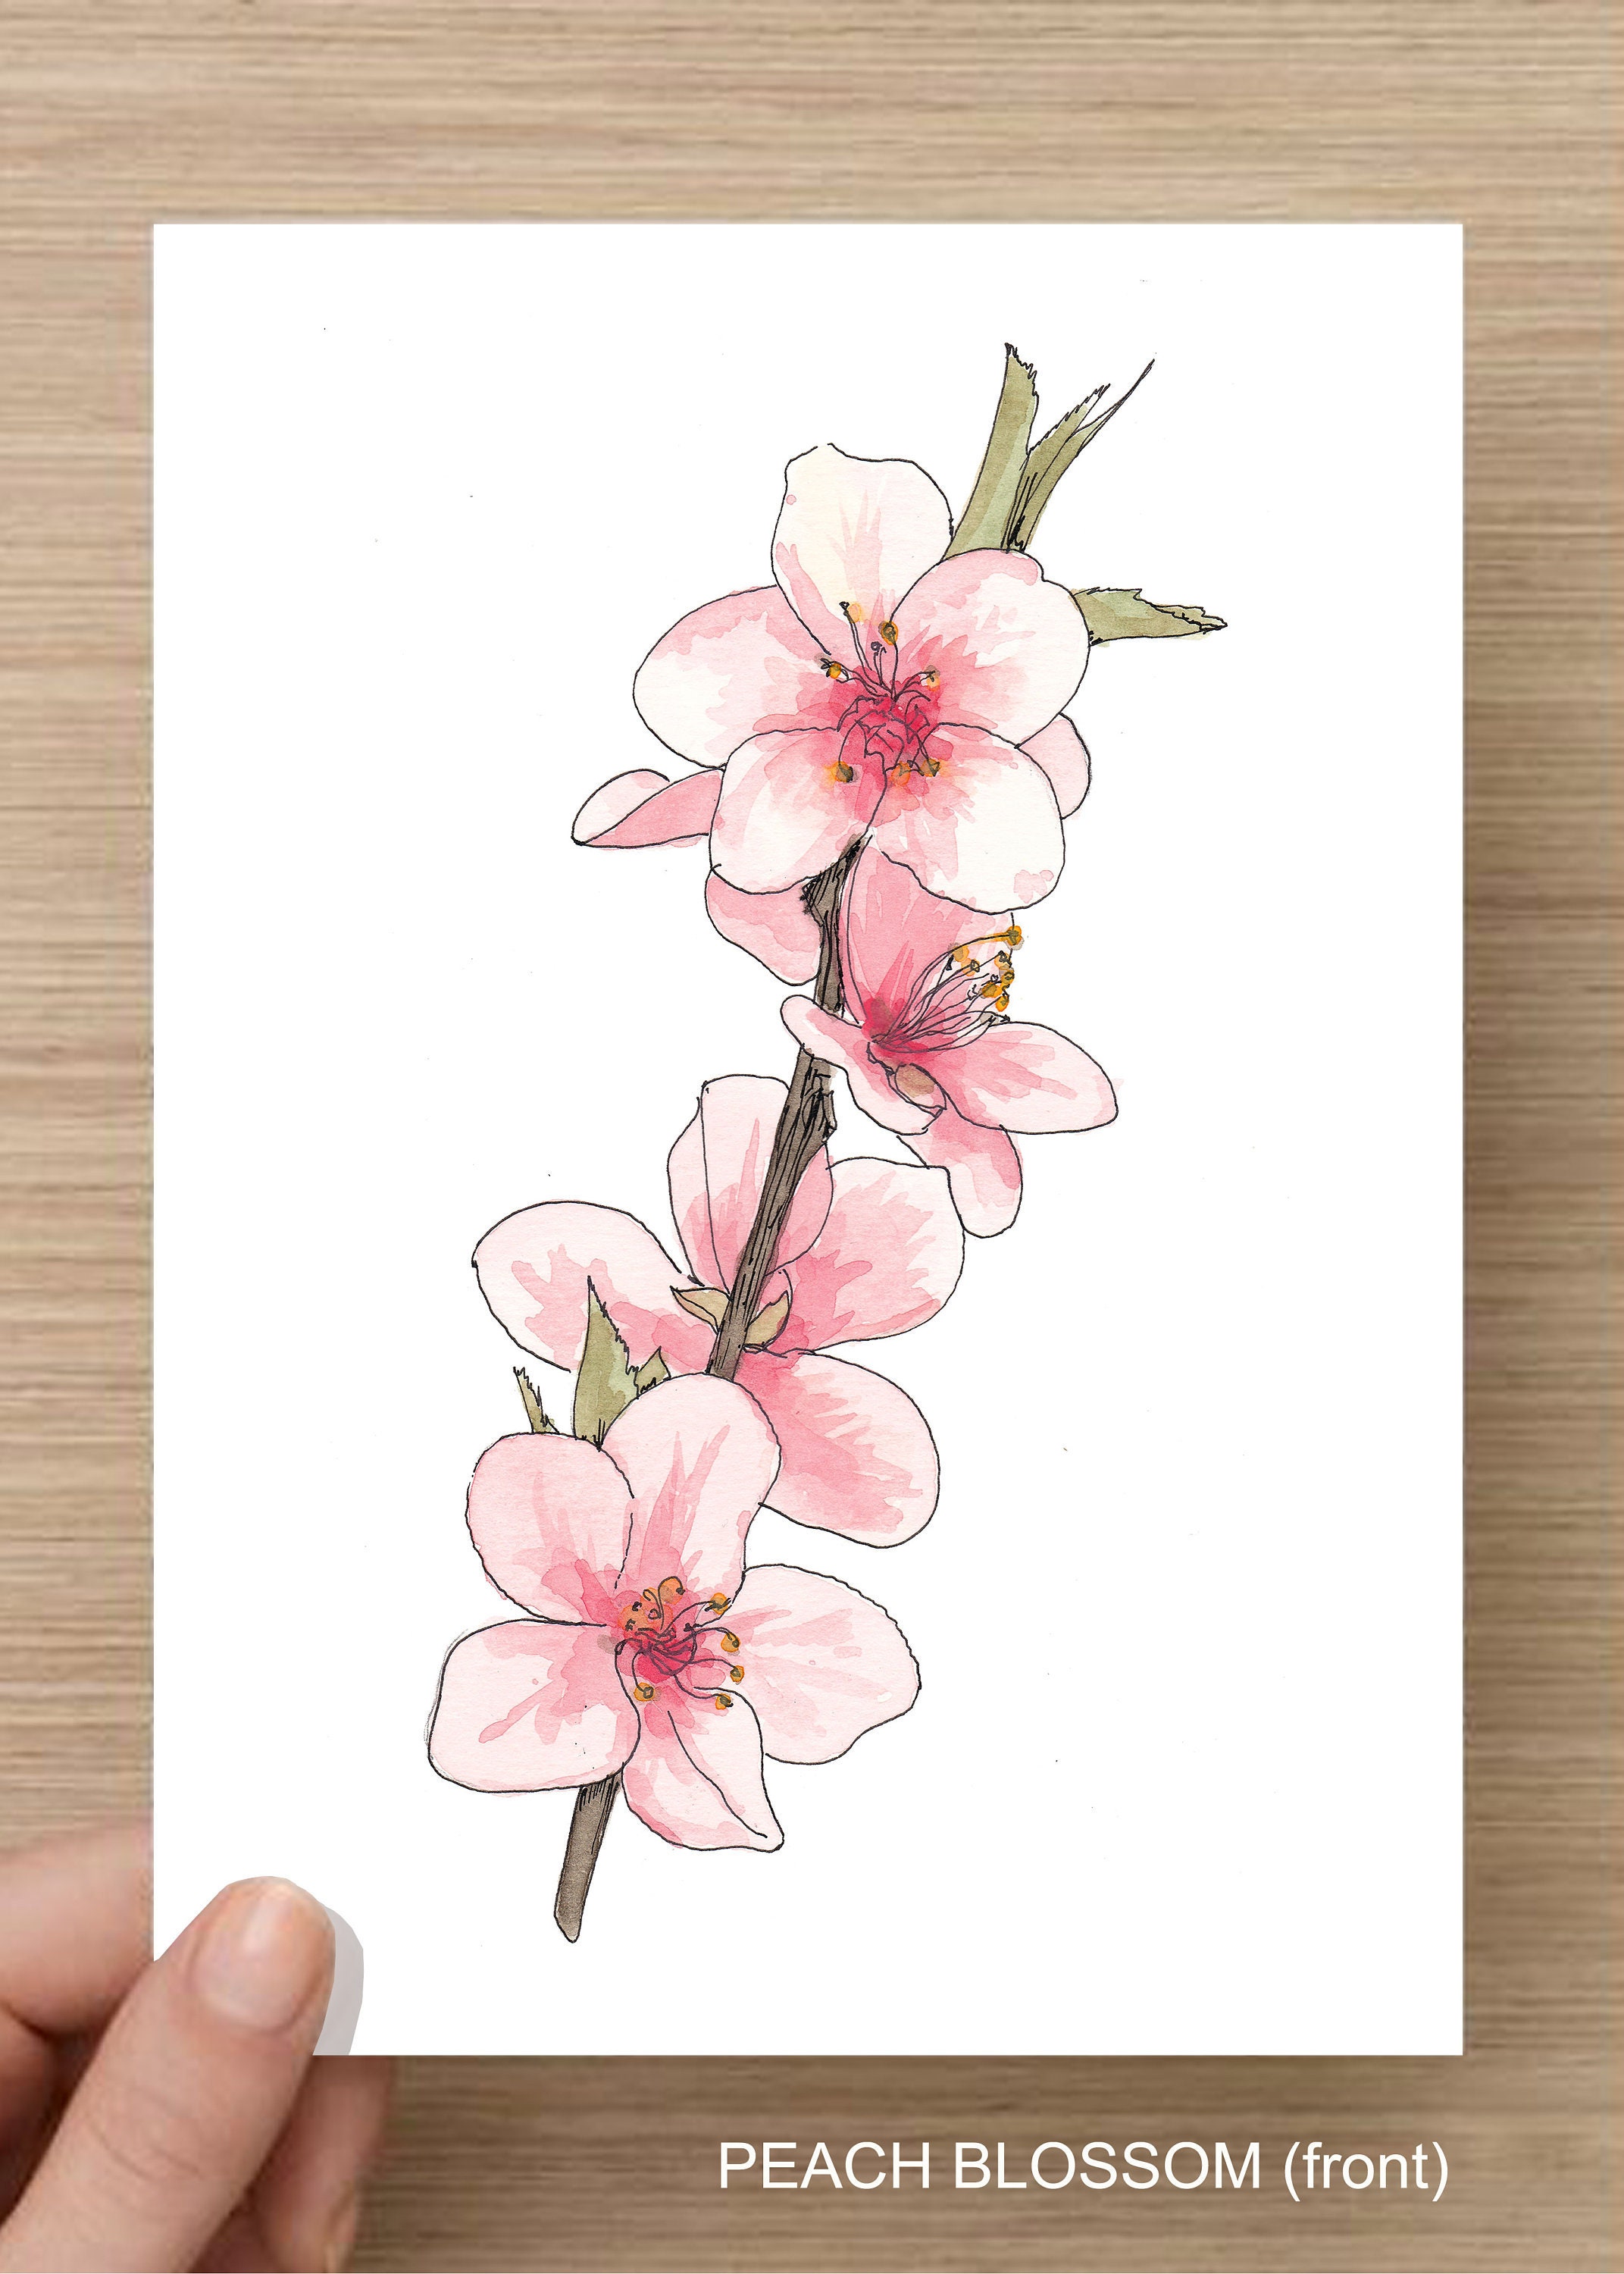 PEACH BLOSSOM FLOWERS - Flower, Tree, Bloom, Pink, Nature, Spring